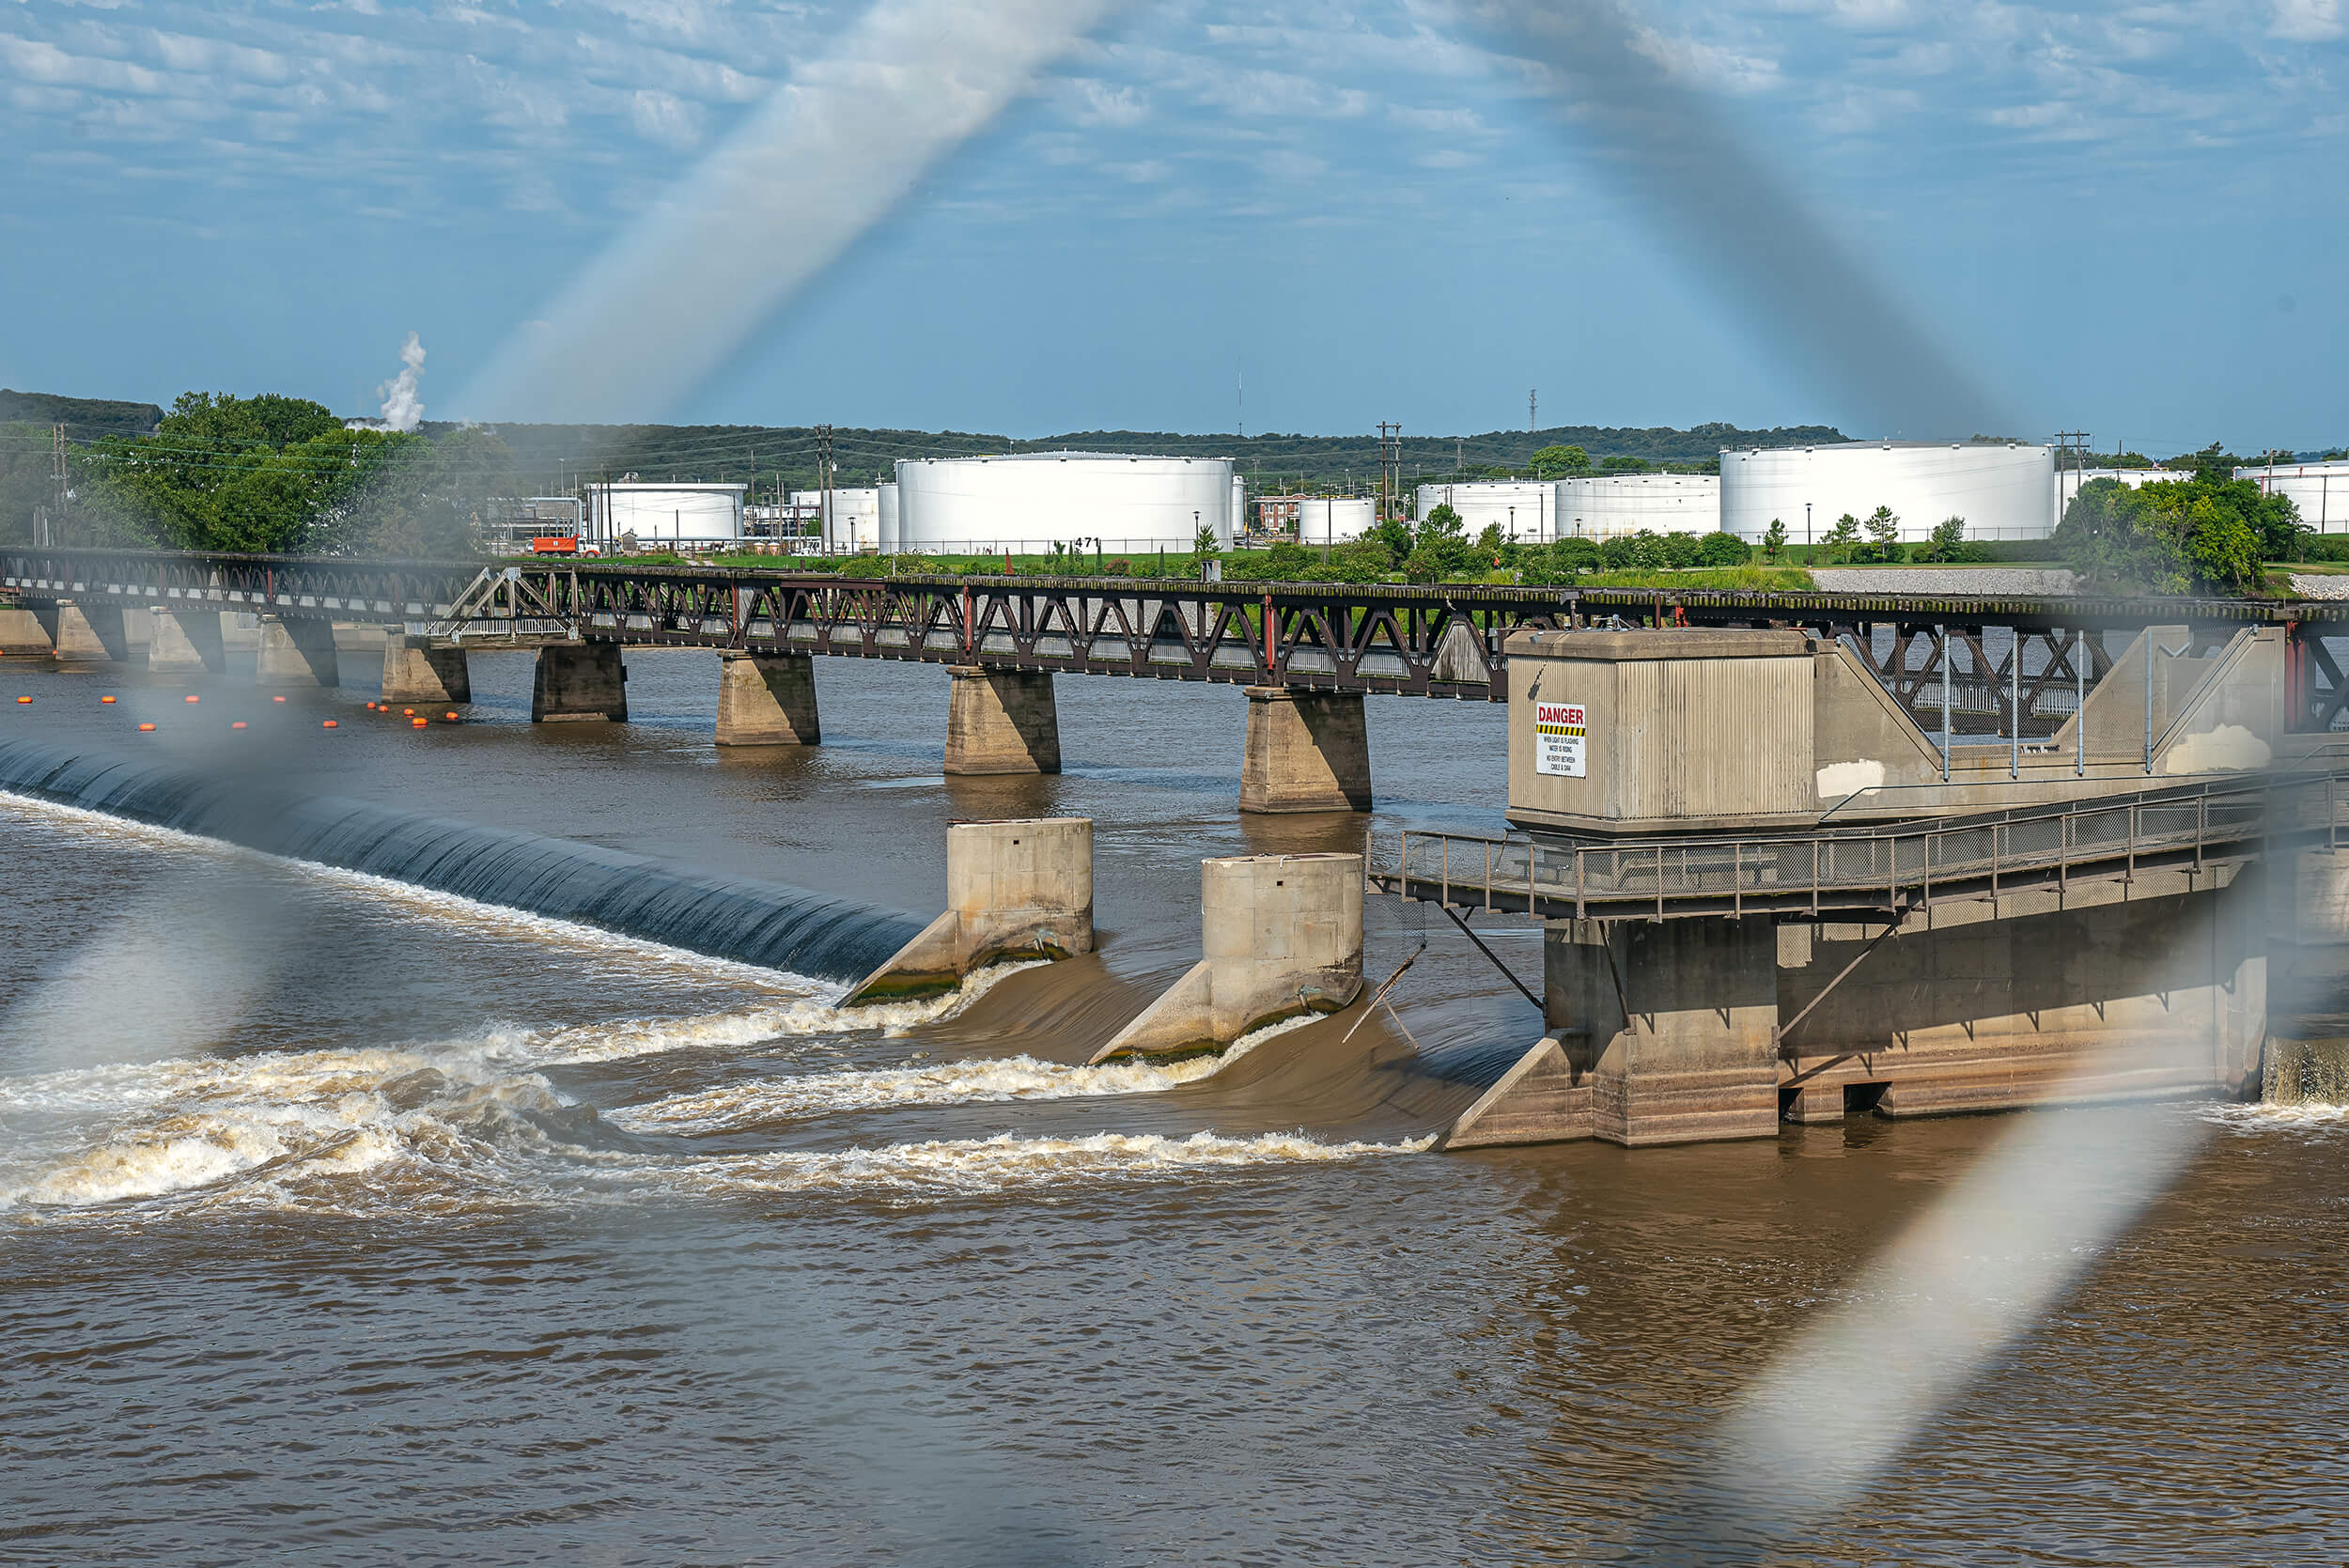 Water gushes through the Zink Dam in Tulsa, OK.